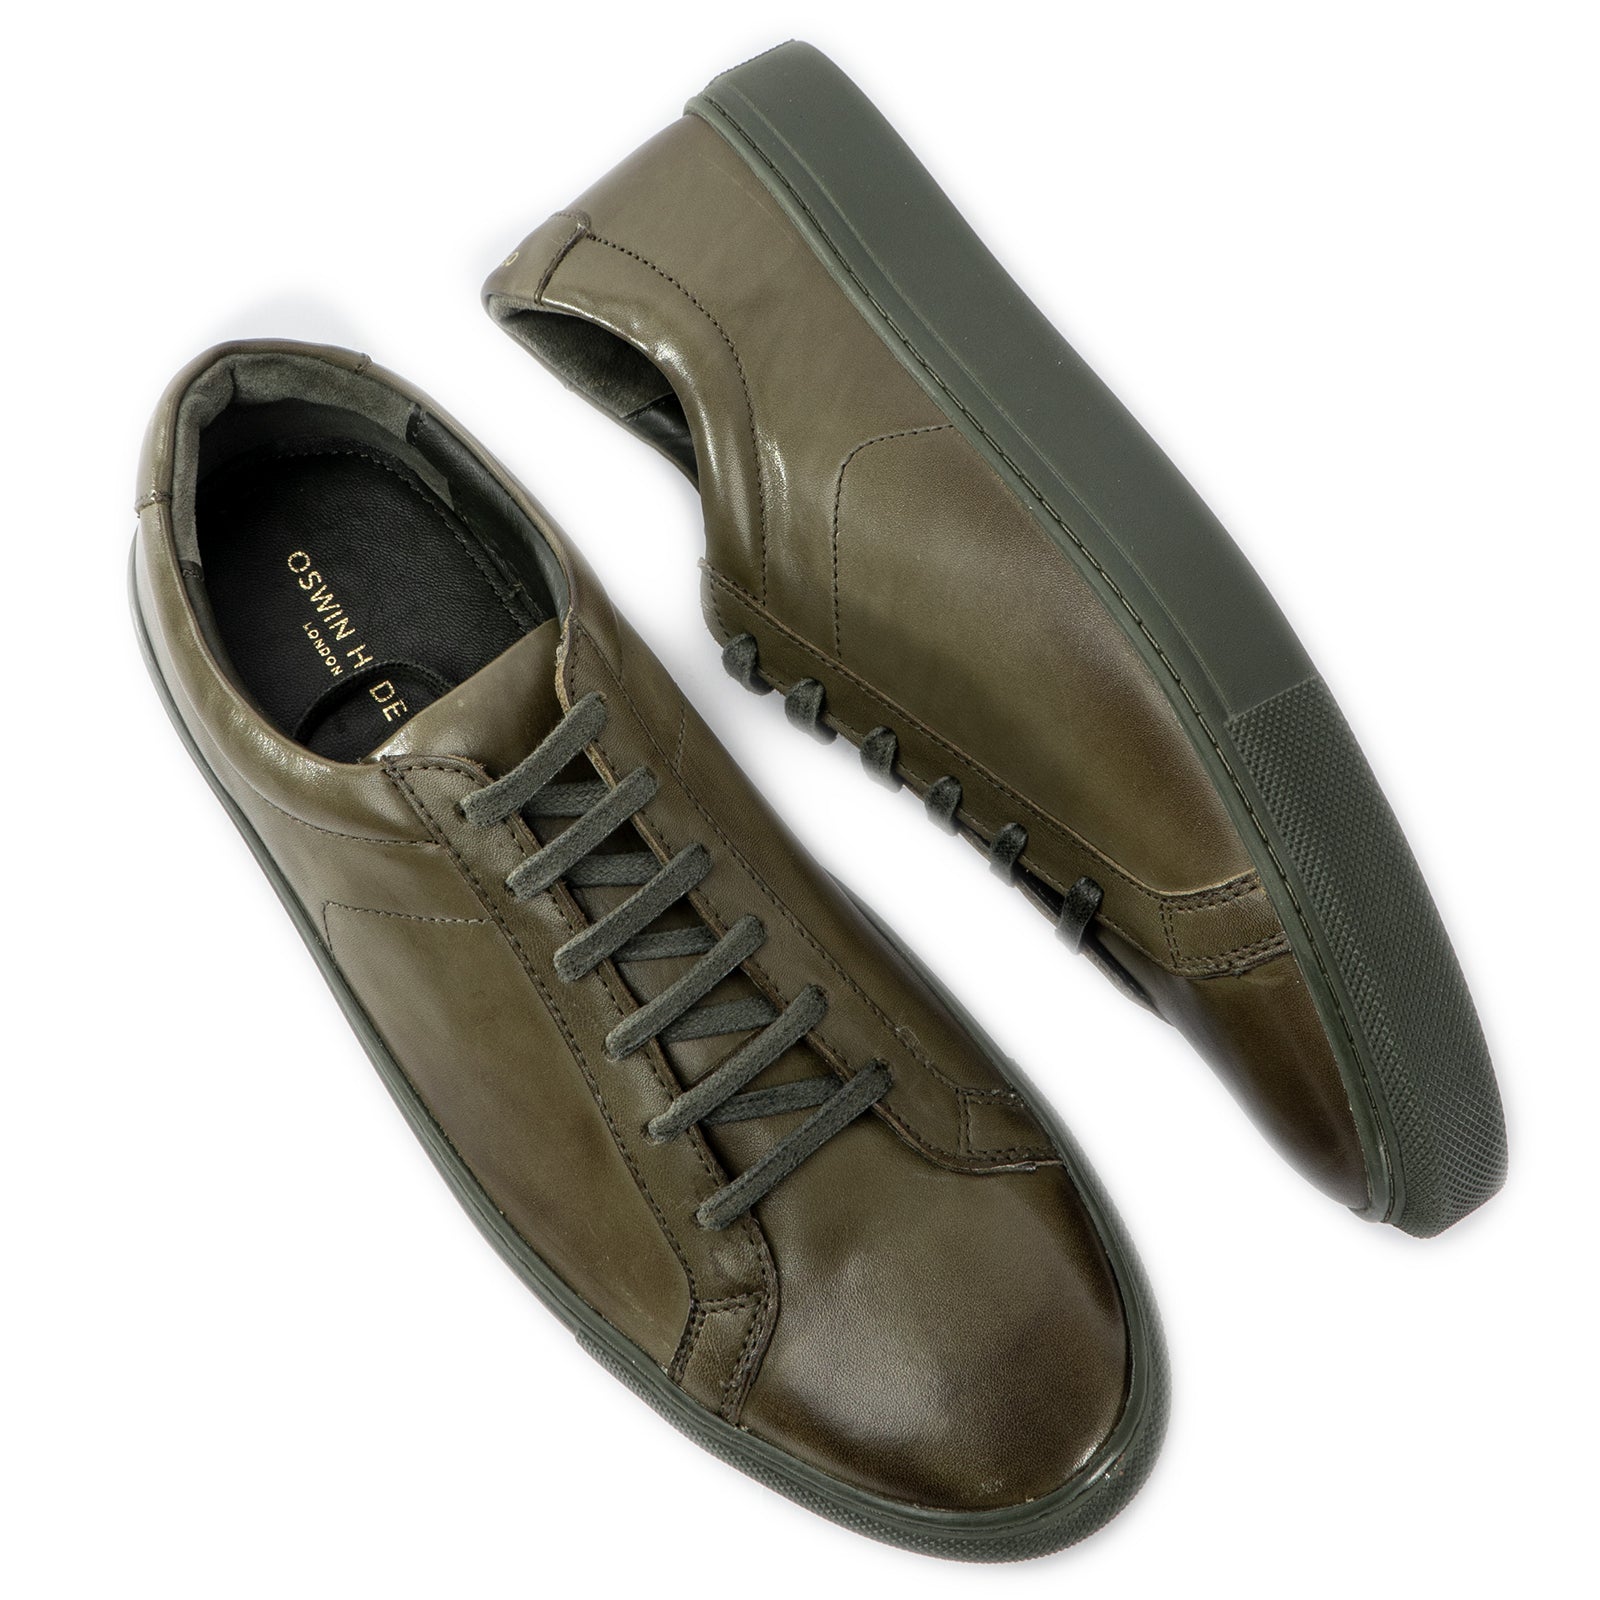 Men's green leather trainers with green sole